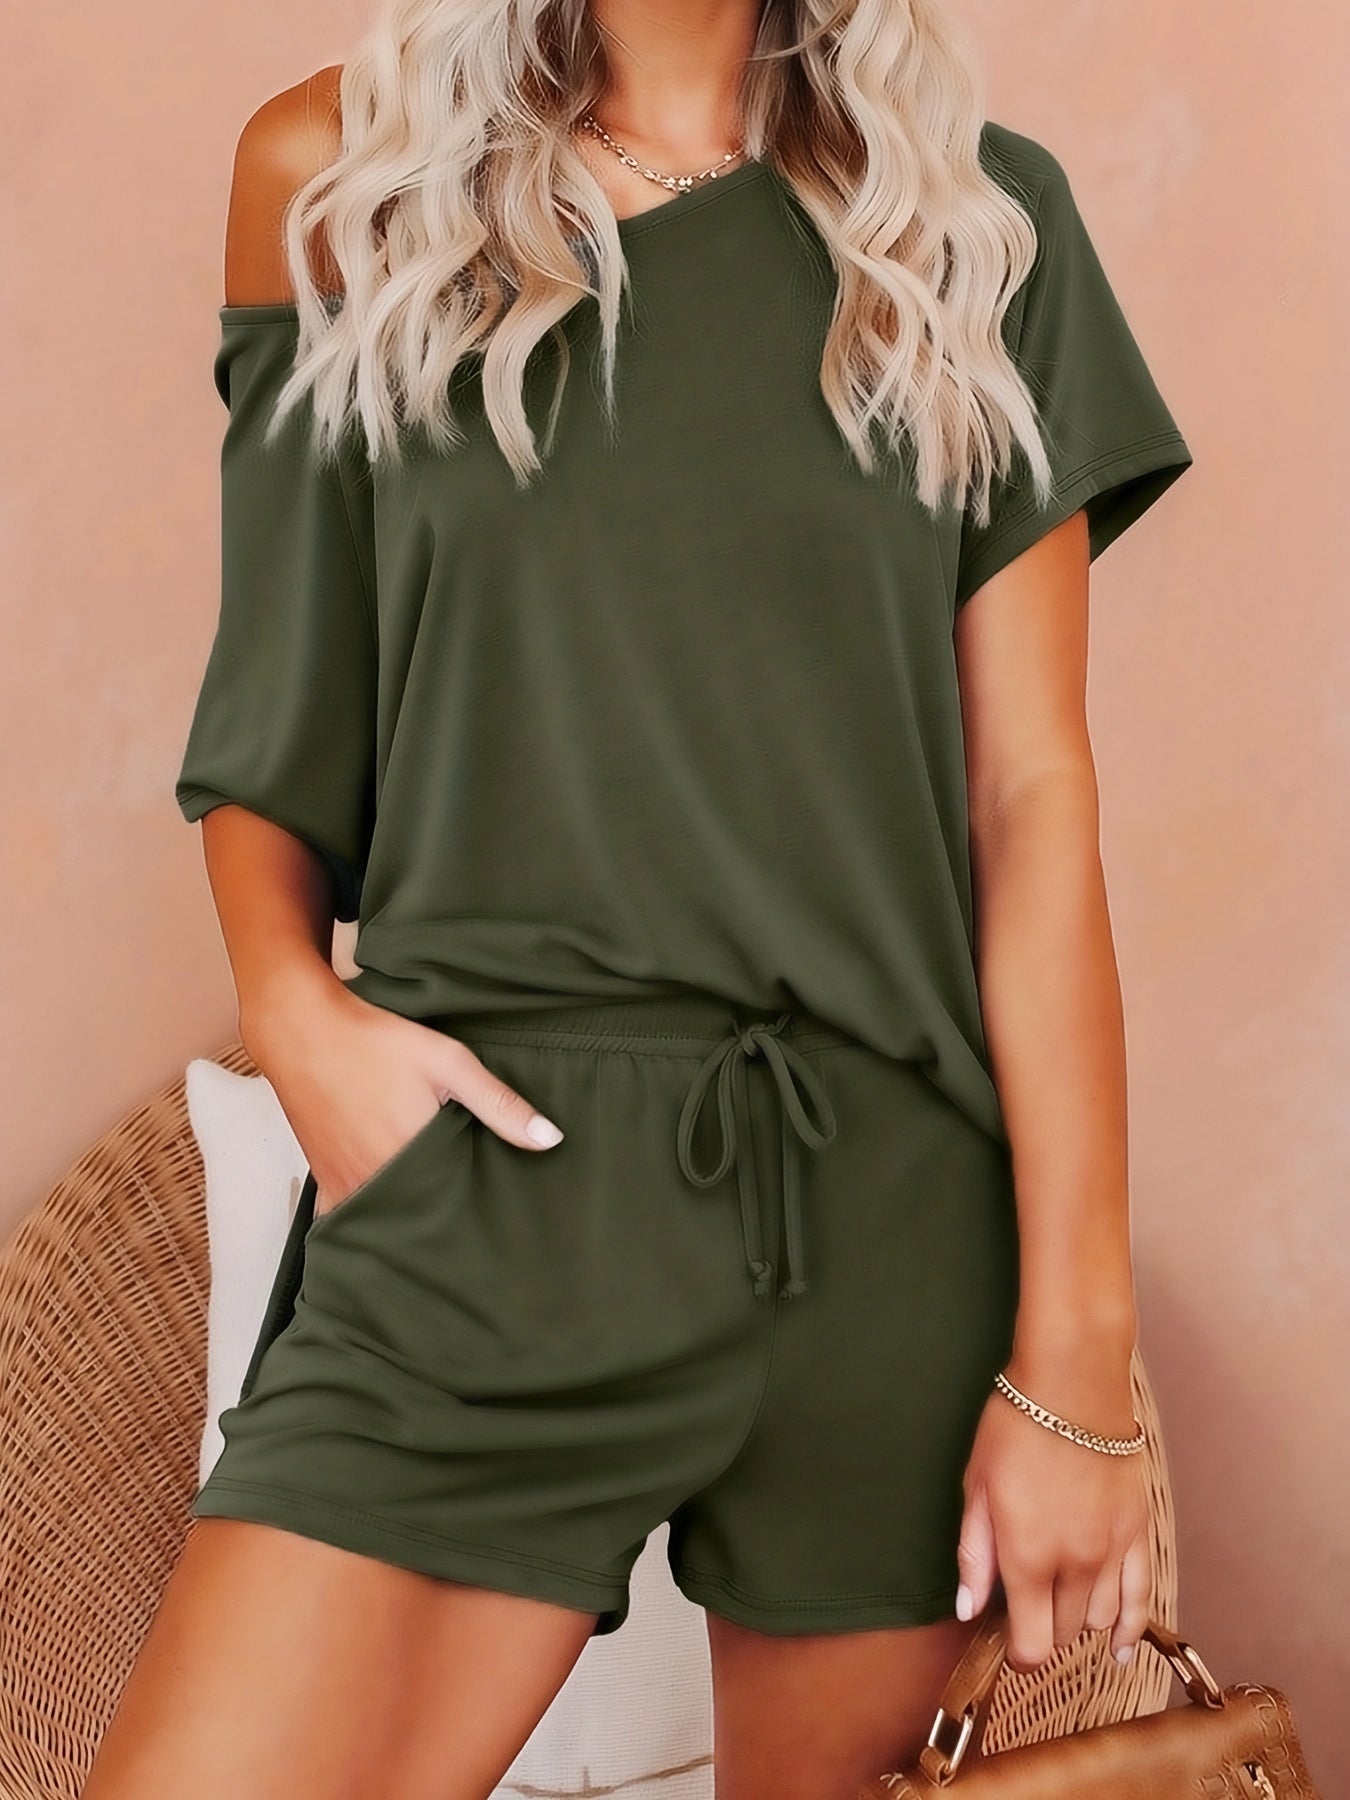 Casual Solid Two-piece Set, Split Short Sleeve T-shirt & Elastic Drawstring Shorts Outfits, Women's Clothing